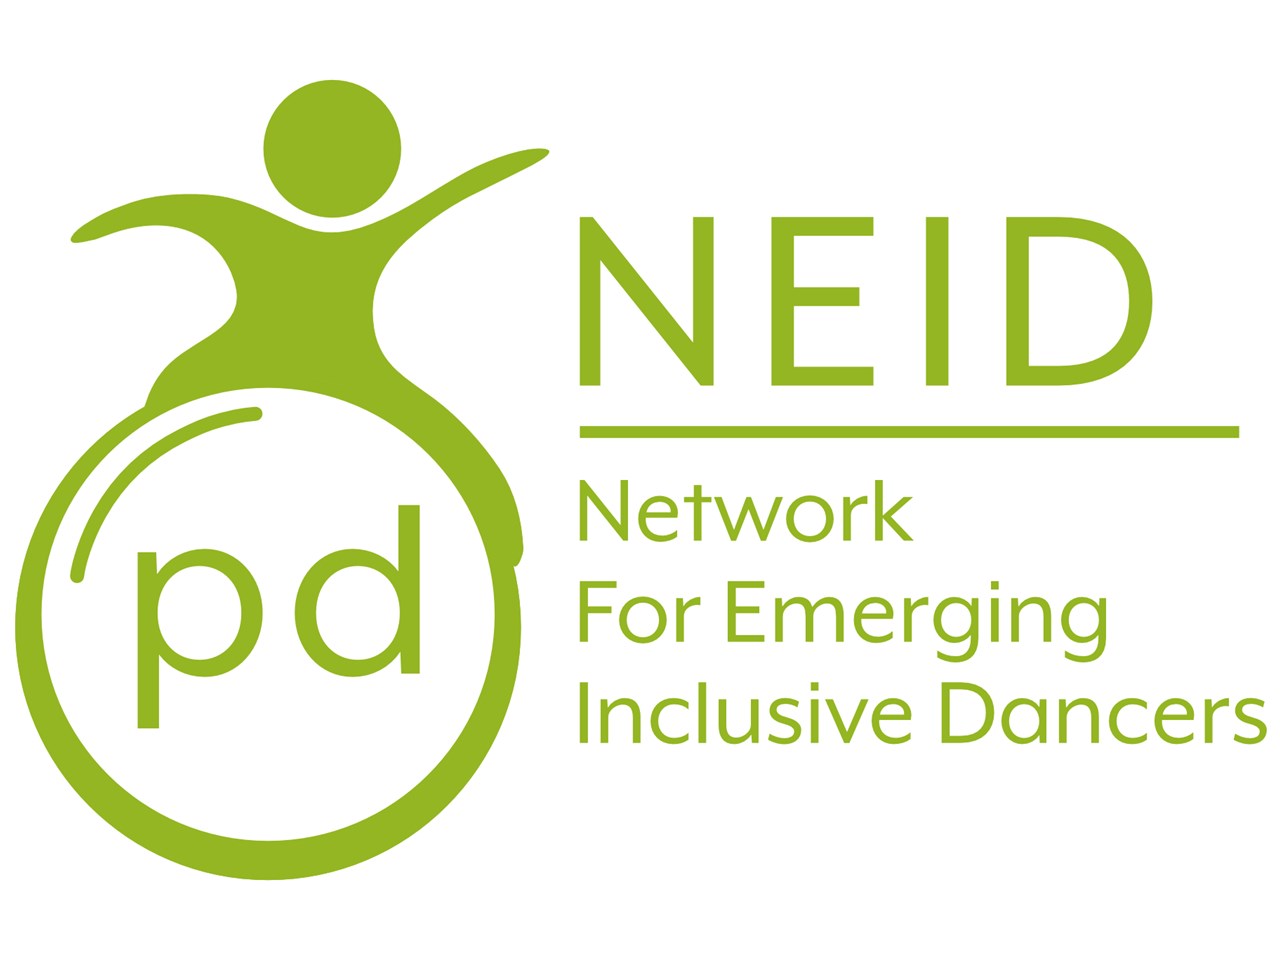 Network for Emerging Inclusive Dancers